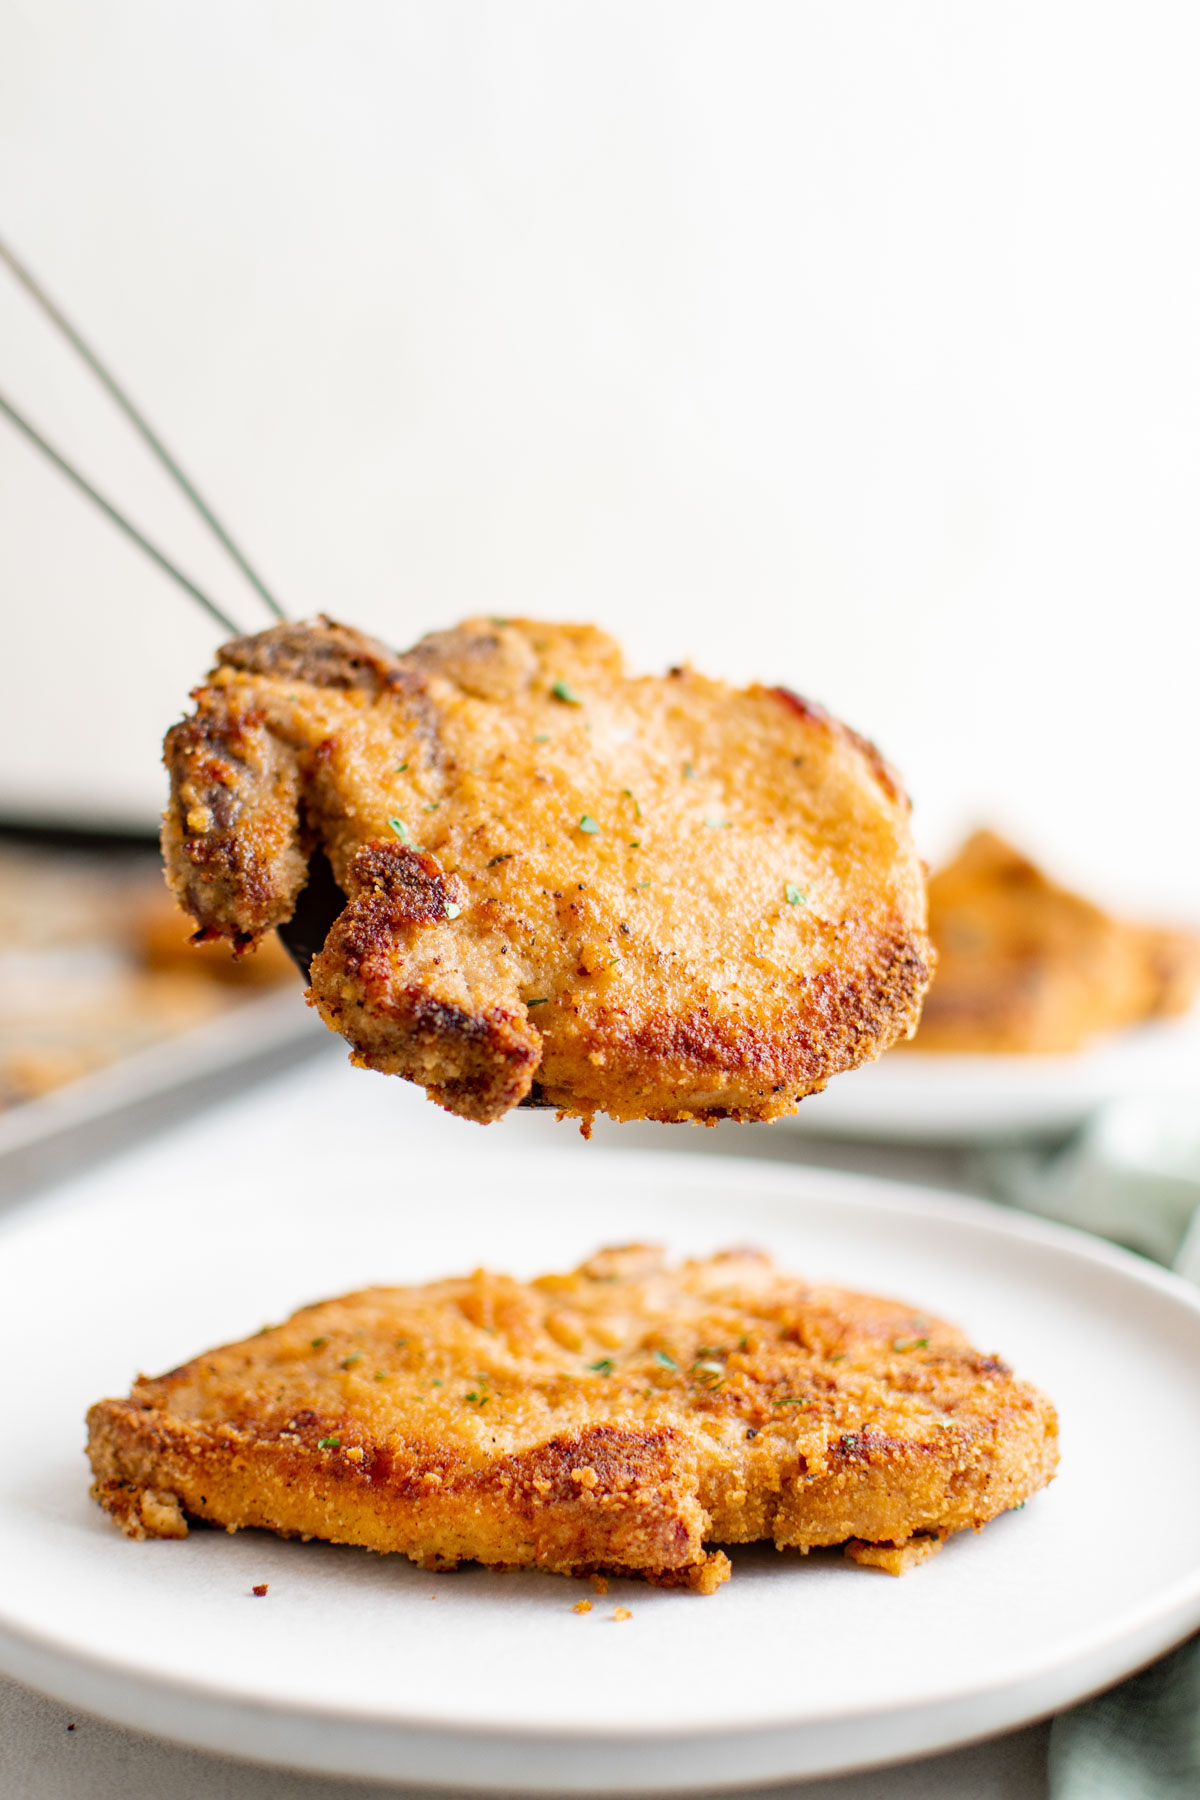 A breaded pork chops on a plate and one on a spatula.